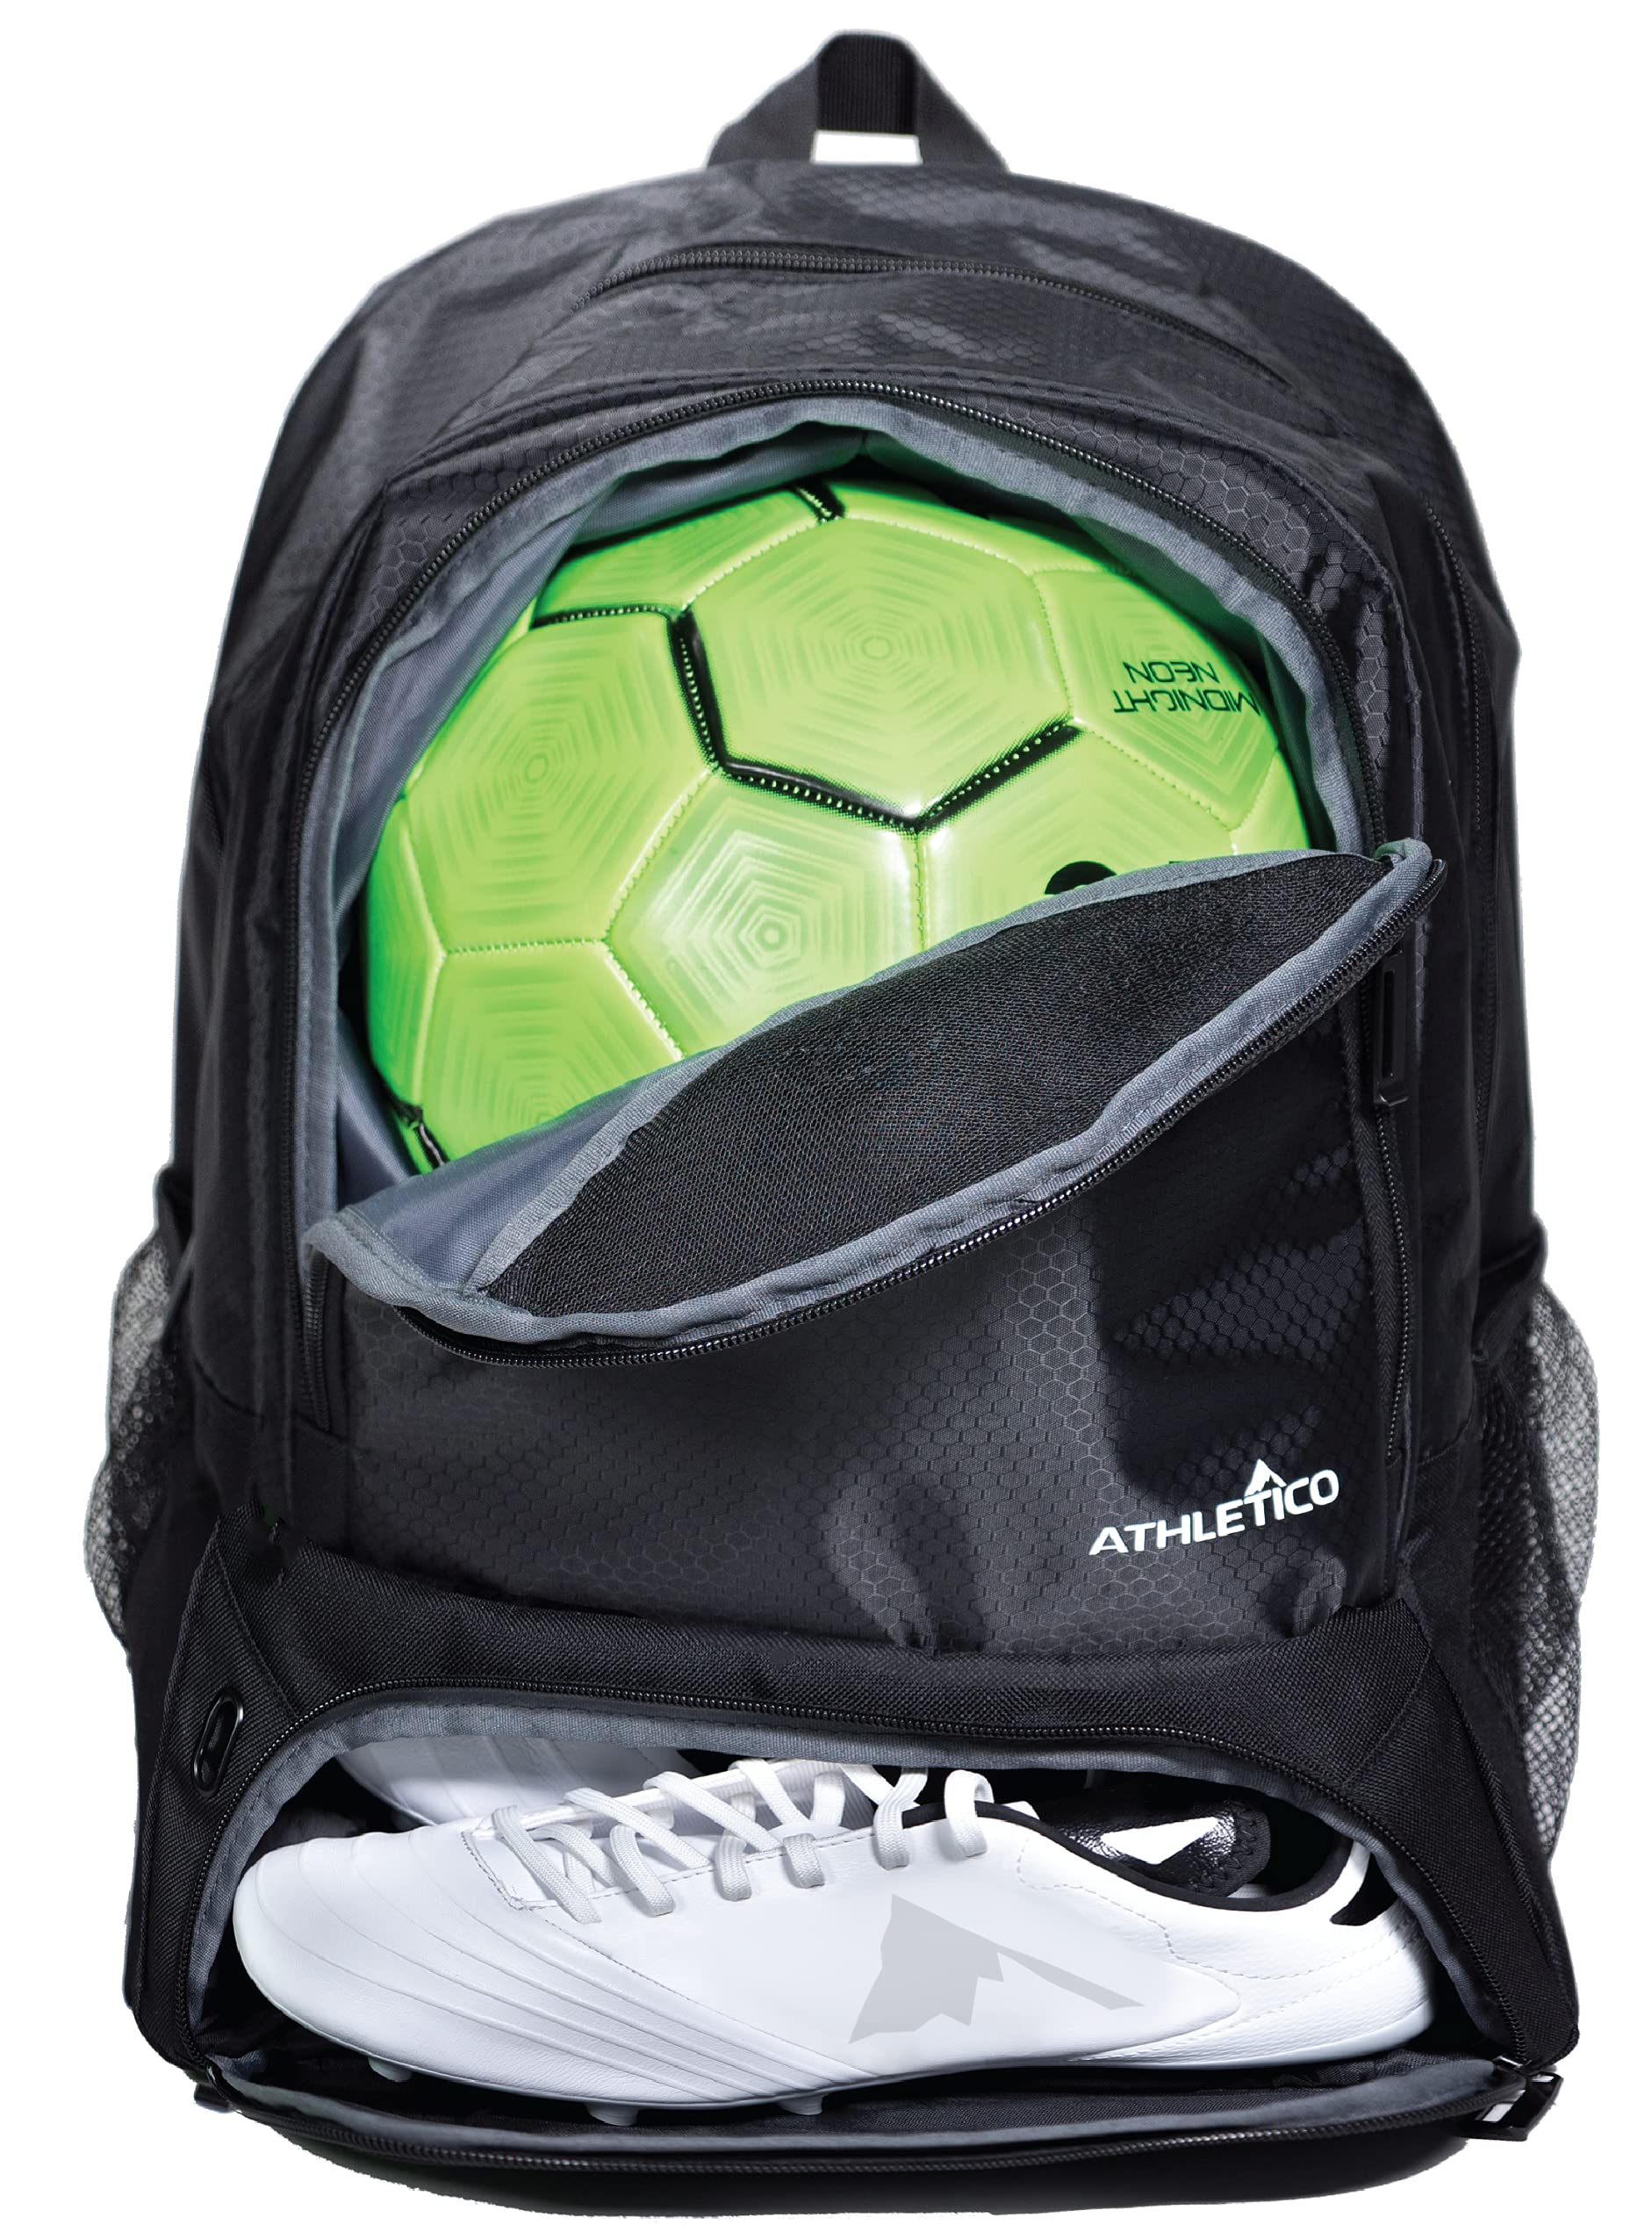 Athletico Youth Soccer Bag - Soccer Backpack & Bags for Basketball, Volleyball & Football | Includes Separate Cleat and Ball Compartment  - Good